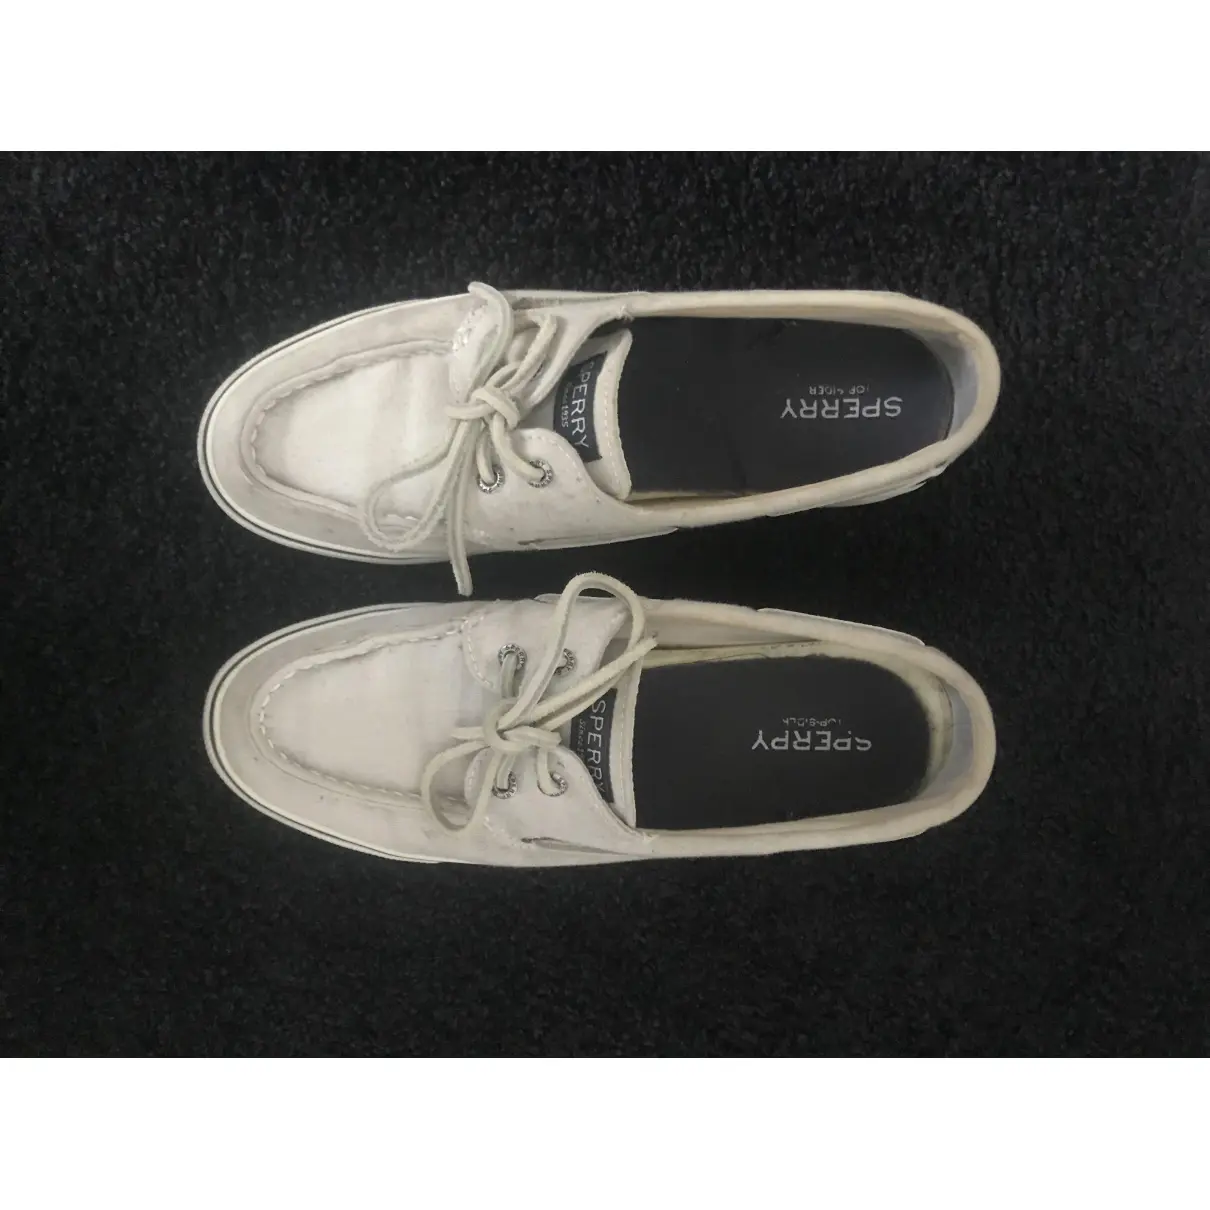 Buy Sperry Cloth trainers online